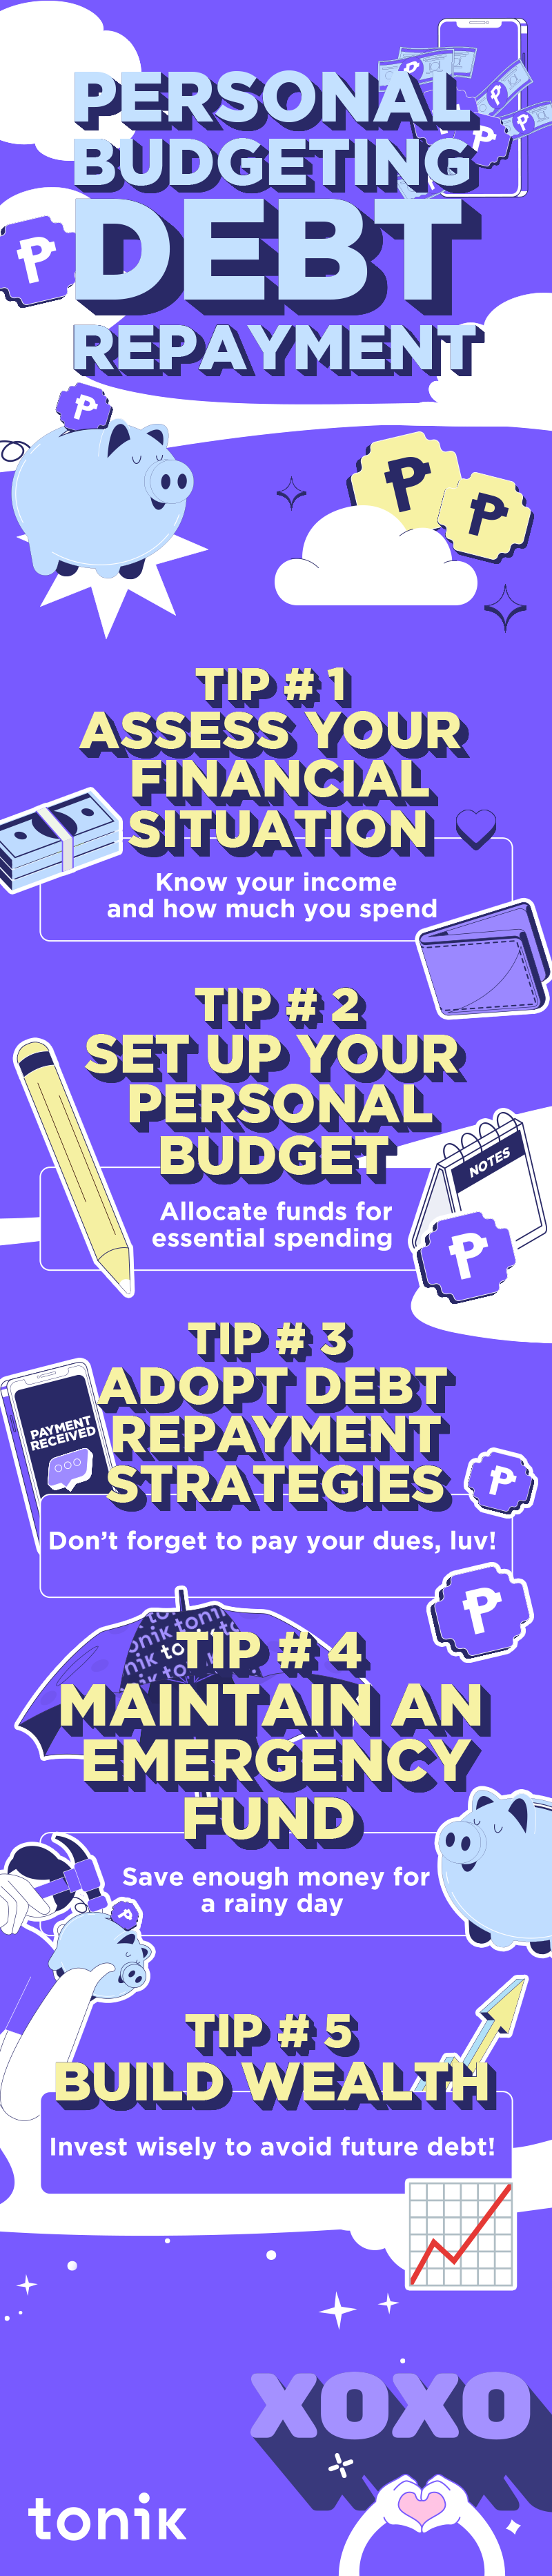 infographic on personal budgeting for debt repayment